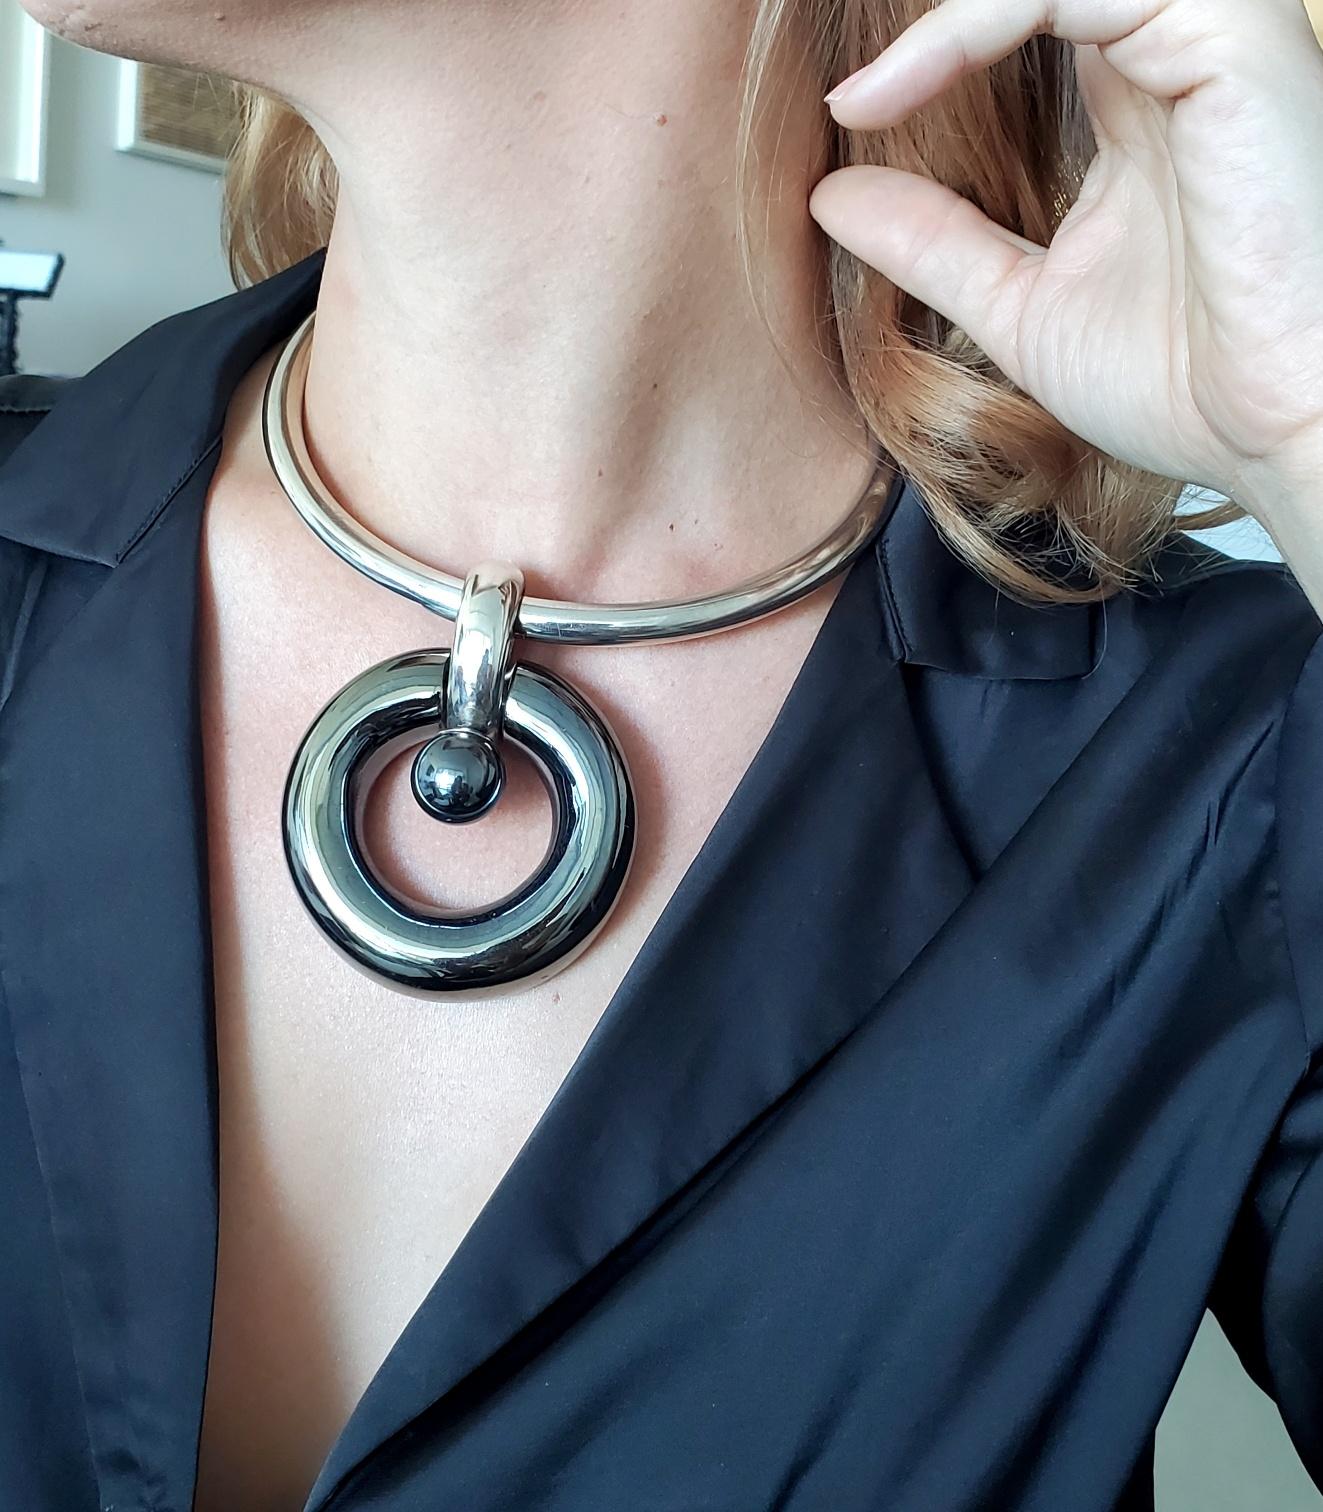 Modern necklace designed by Takashi Wada (1938-).

An impressive ultra modern sculptural necklace, created by the Japanese designer and silversmith Takashi Wada, back in the 1980. This beautiful torque necklace has been crafted with purist geometric